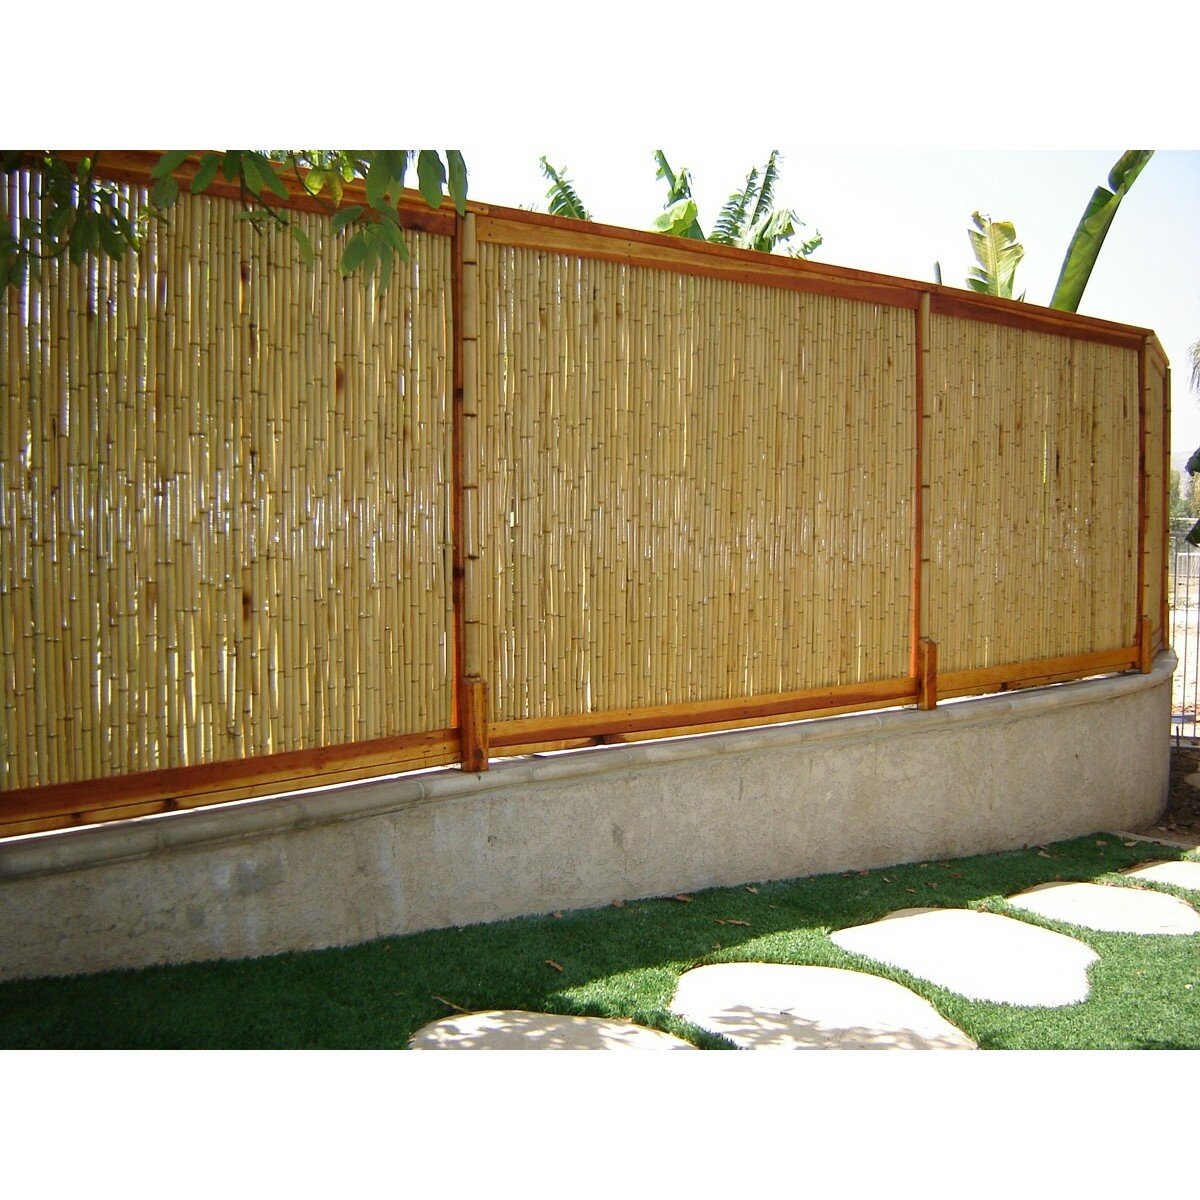 Backyard X Scapes Rolled Bamboo Privacy Screen Reviews